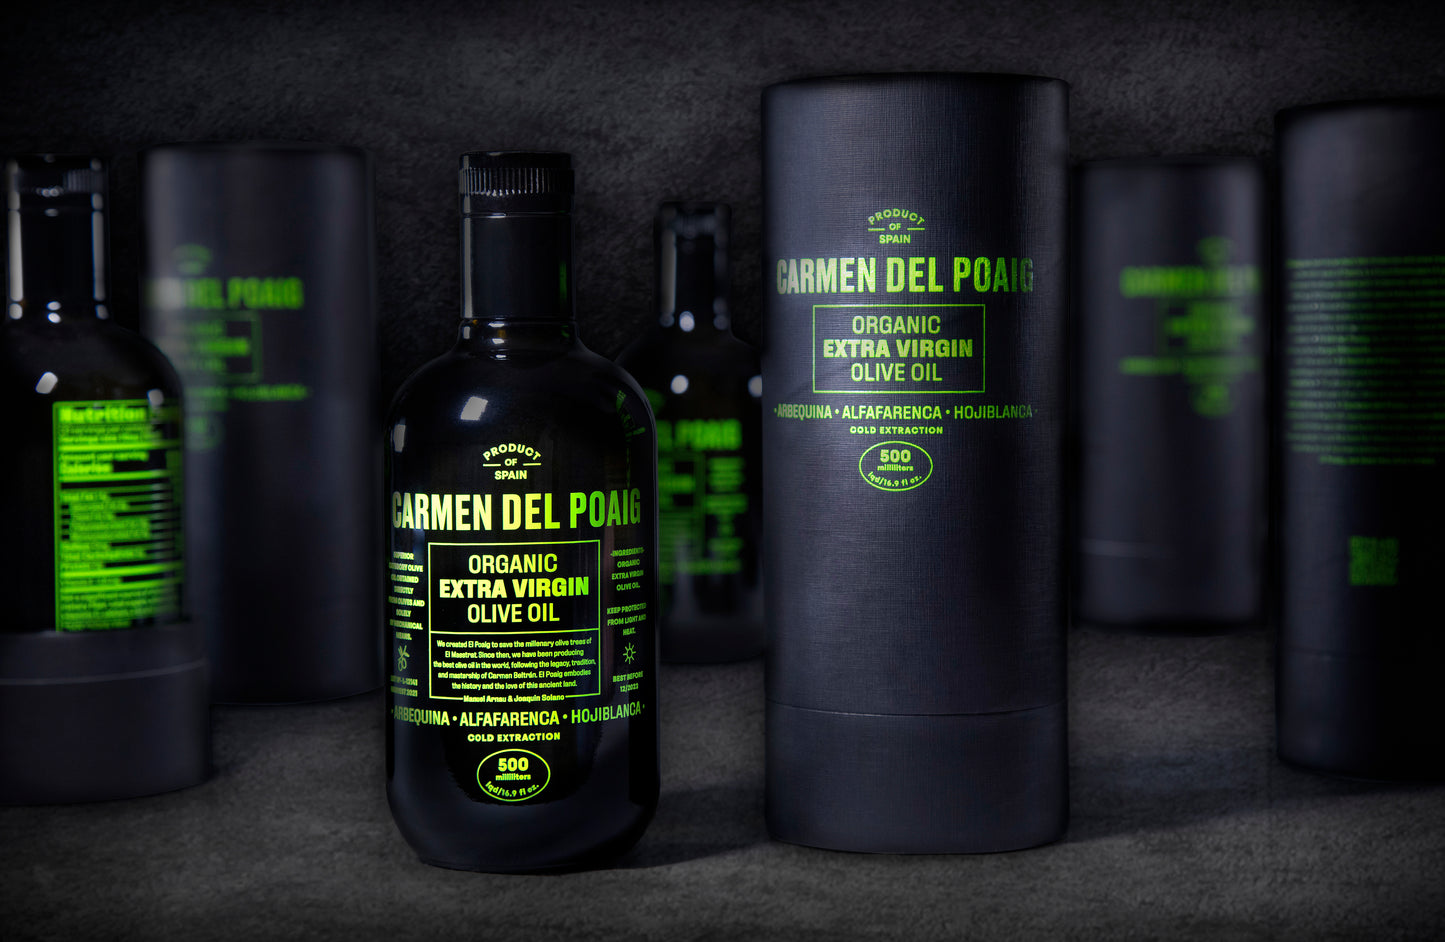 Carmen del Poaig (500ml) Product sold out. Thank you! We are waiting for you next season!